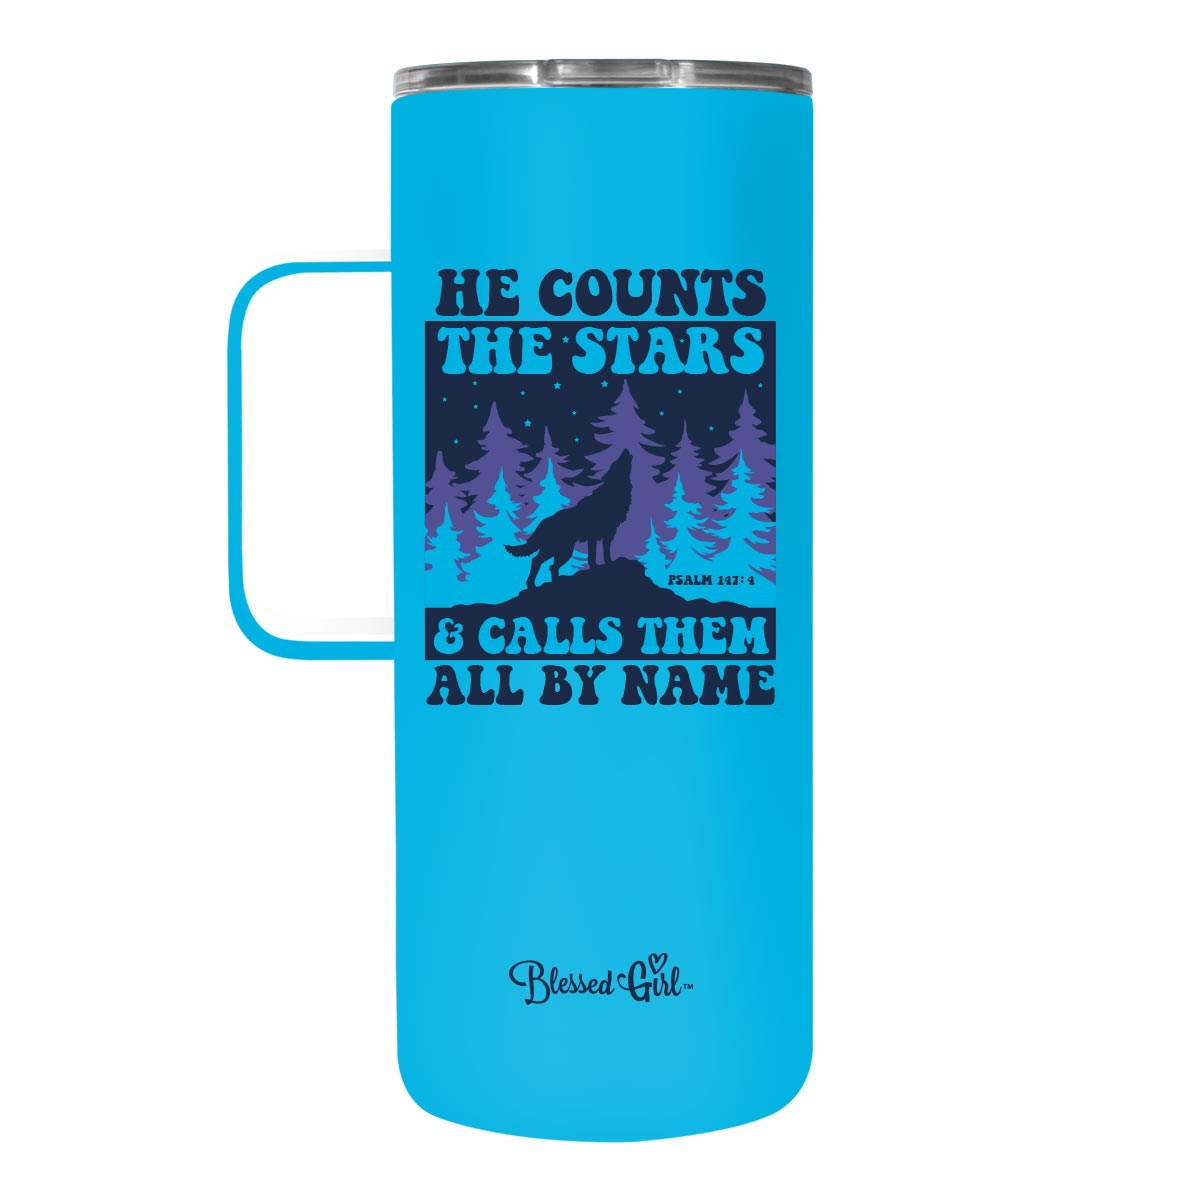 Blessed Girl 22 oz Stainless Steel Mug With Handle He Counts